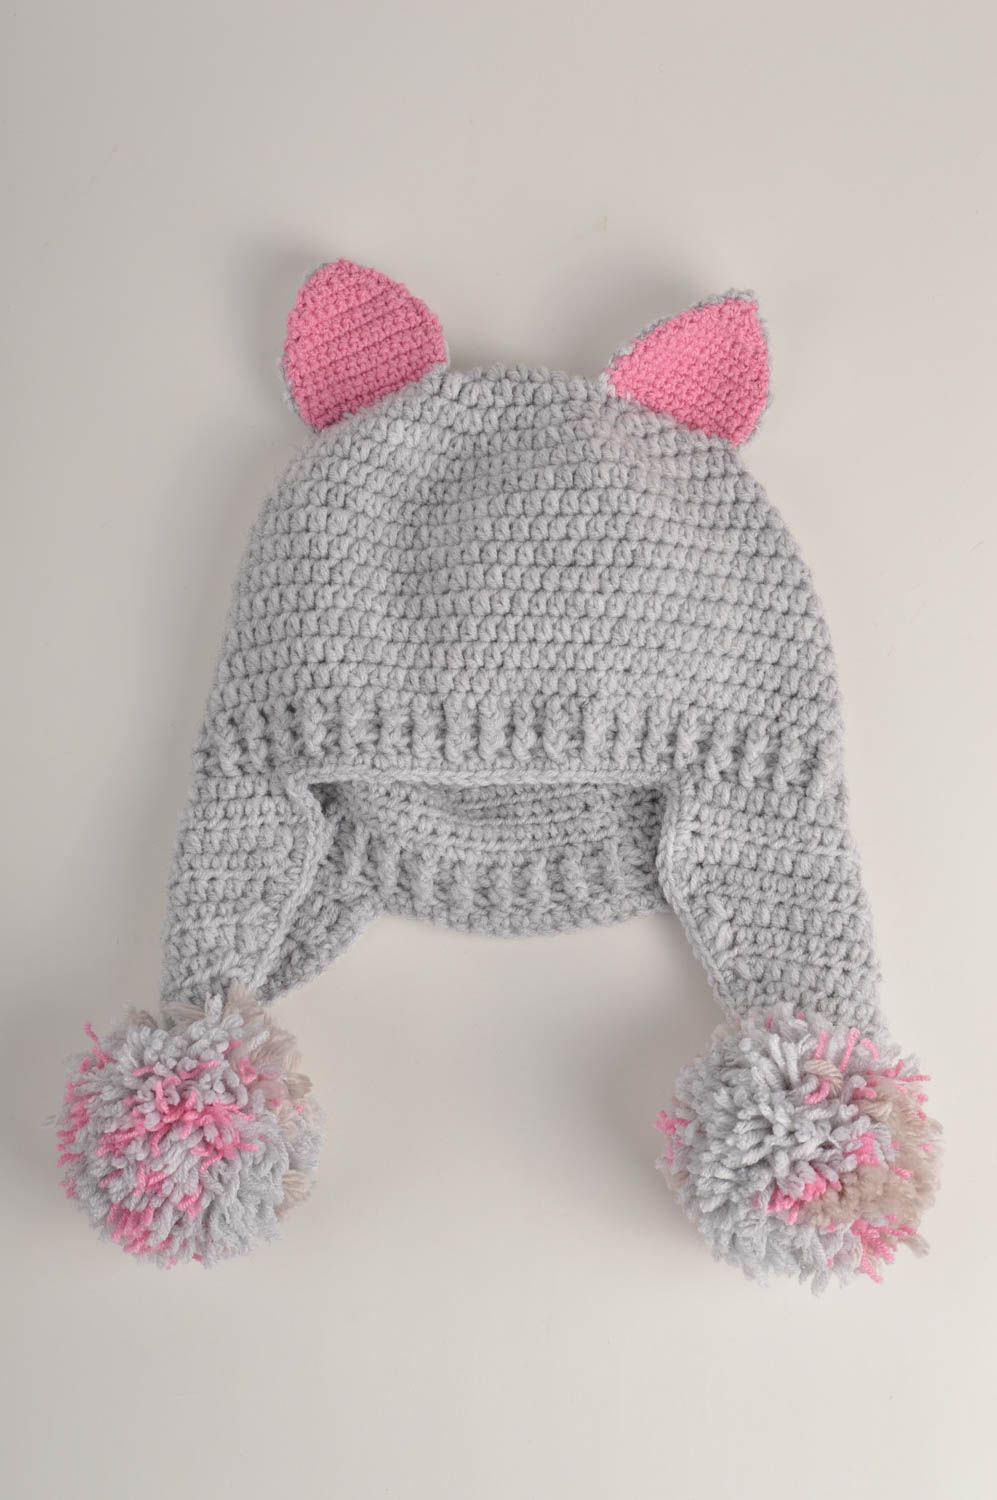 Beautiful handmade crochet hat warm baby hat fashion accessories for her photo 2